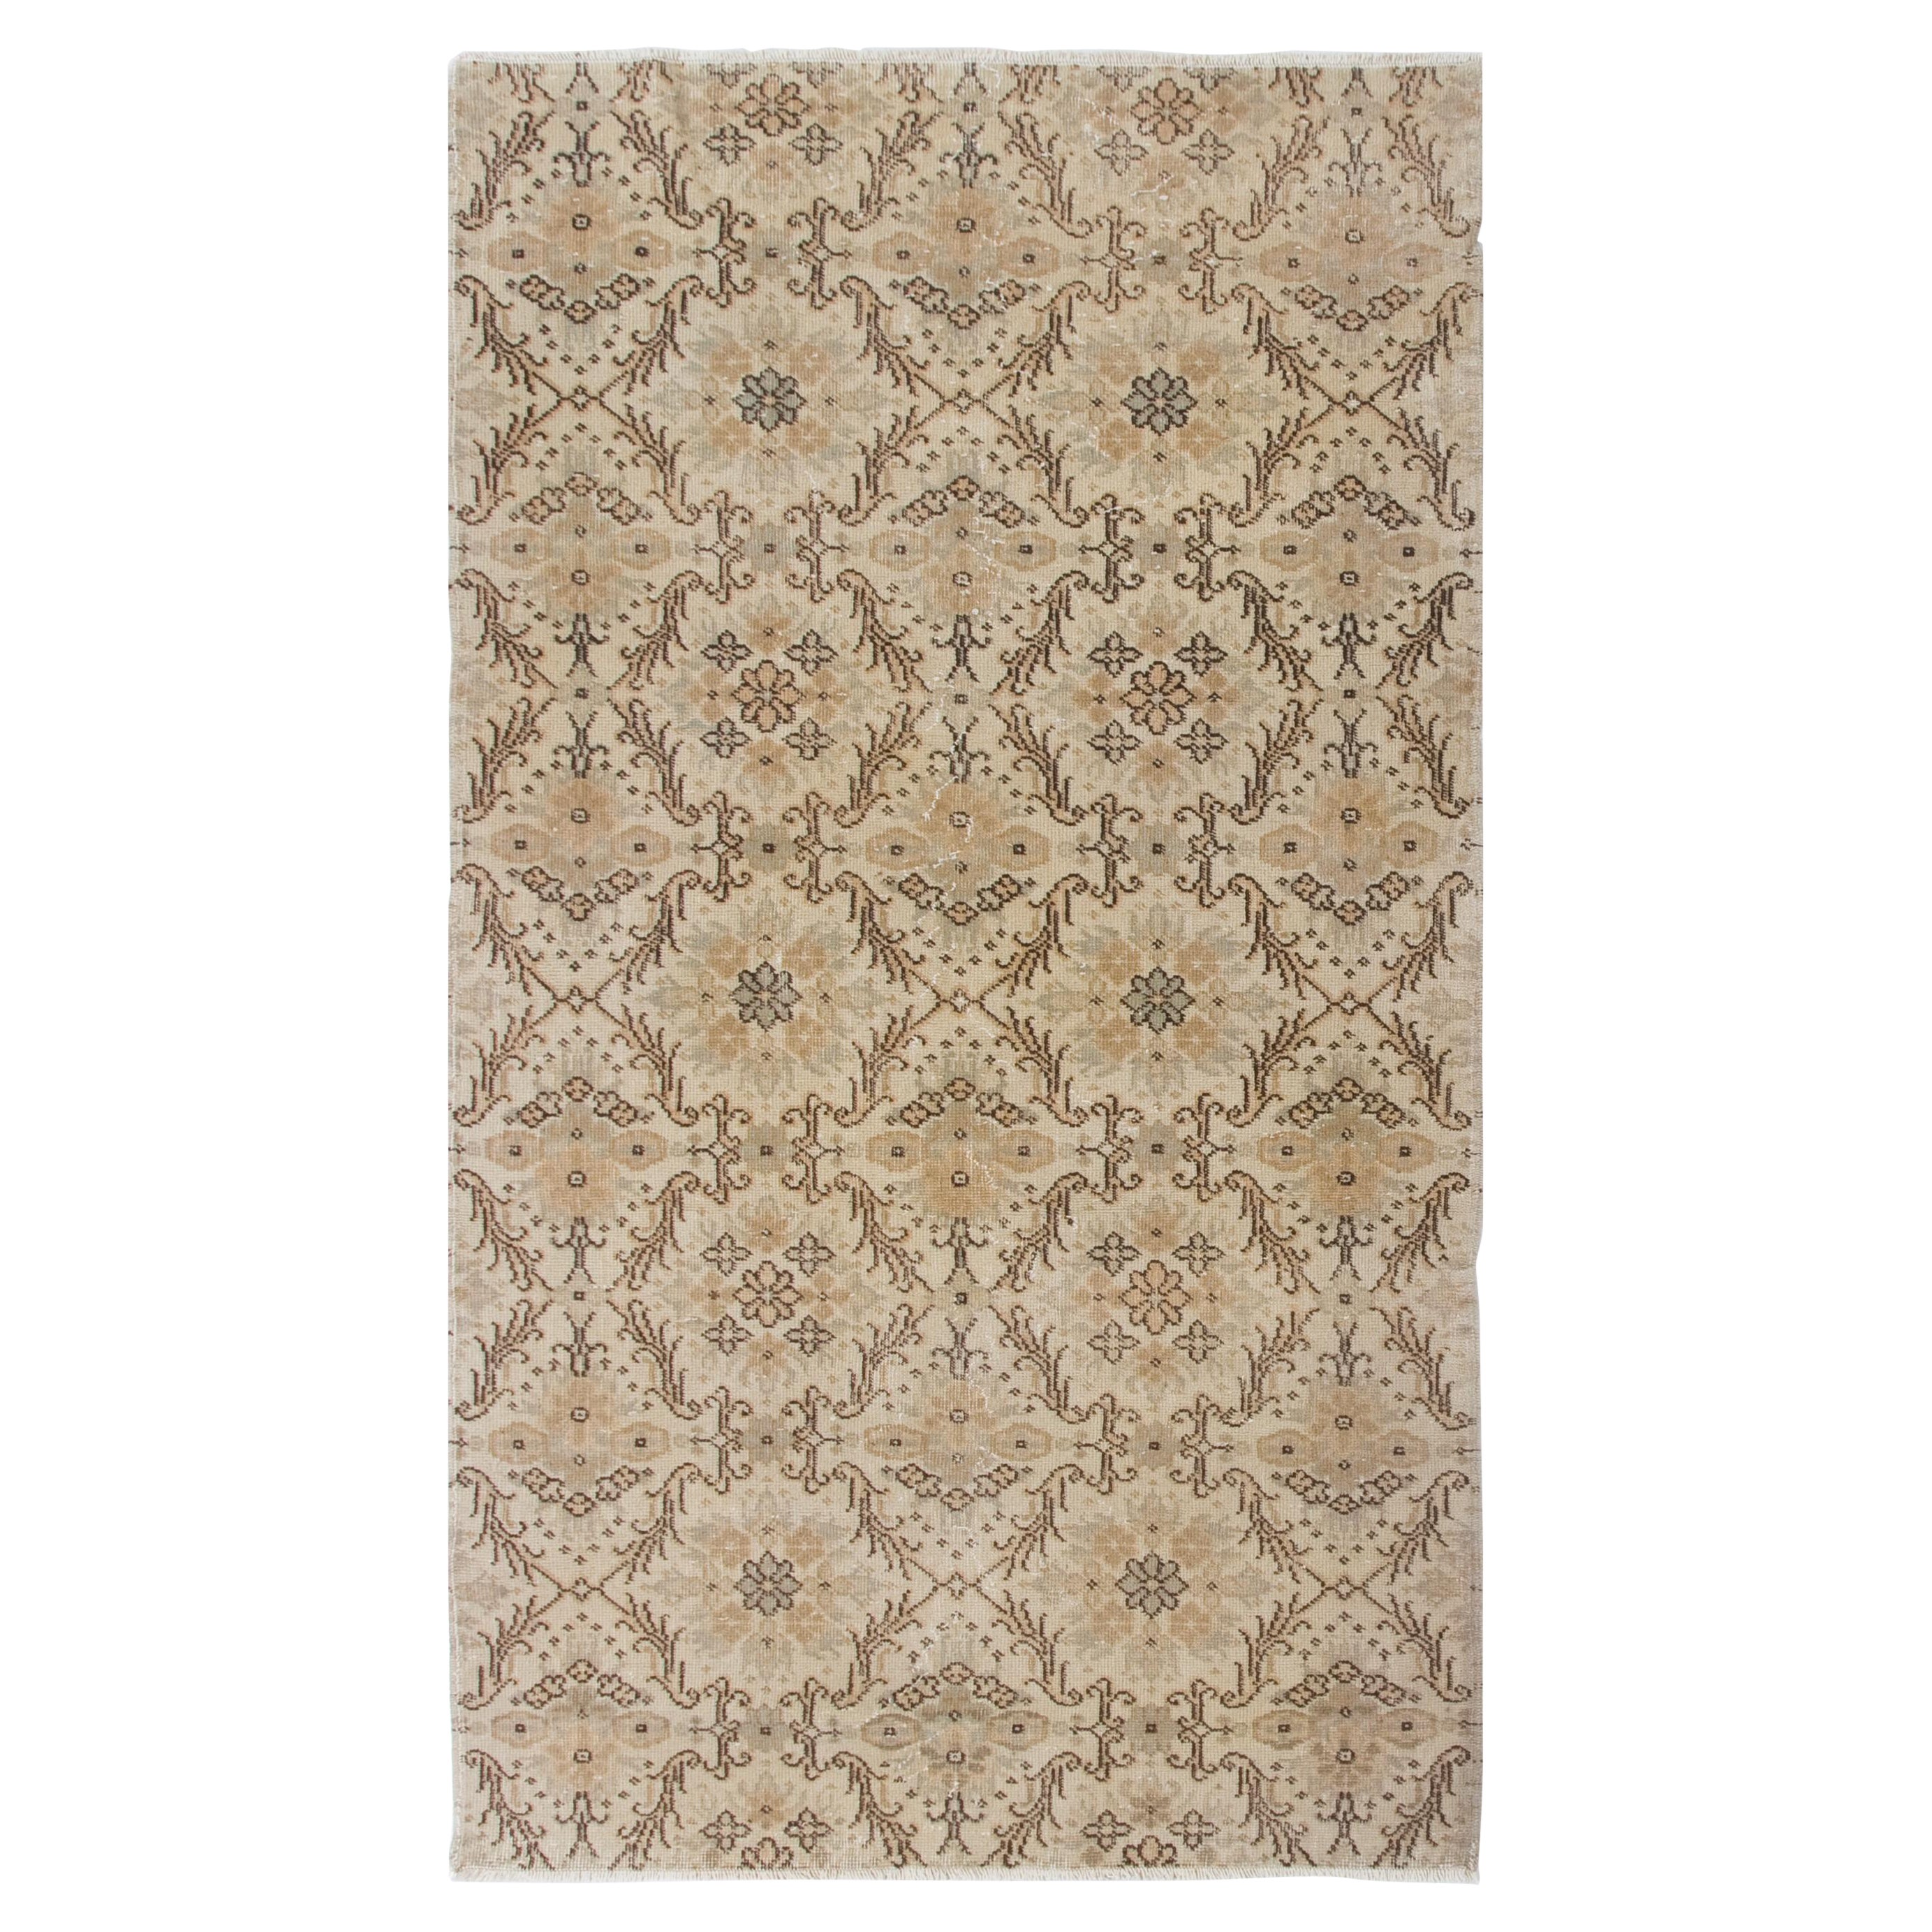 4.2x7.5 ft Decorative Vintage Handmade Anatolian Accent Rug with Floral Design For Sale